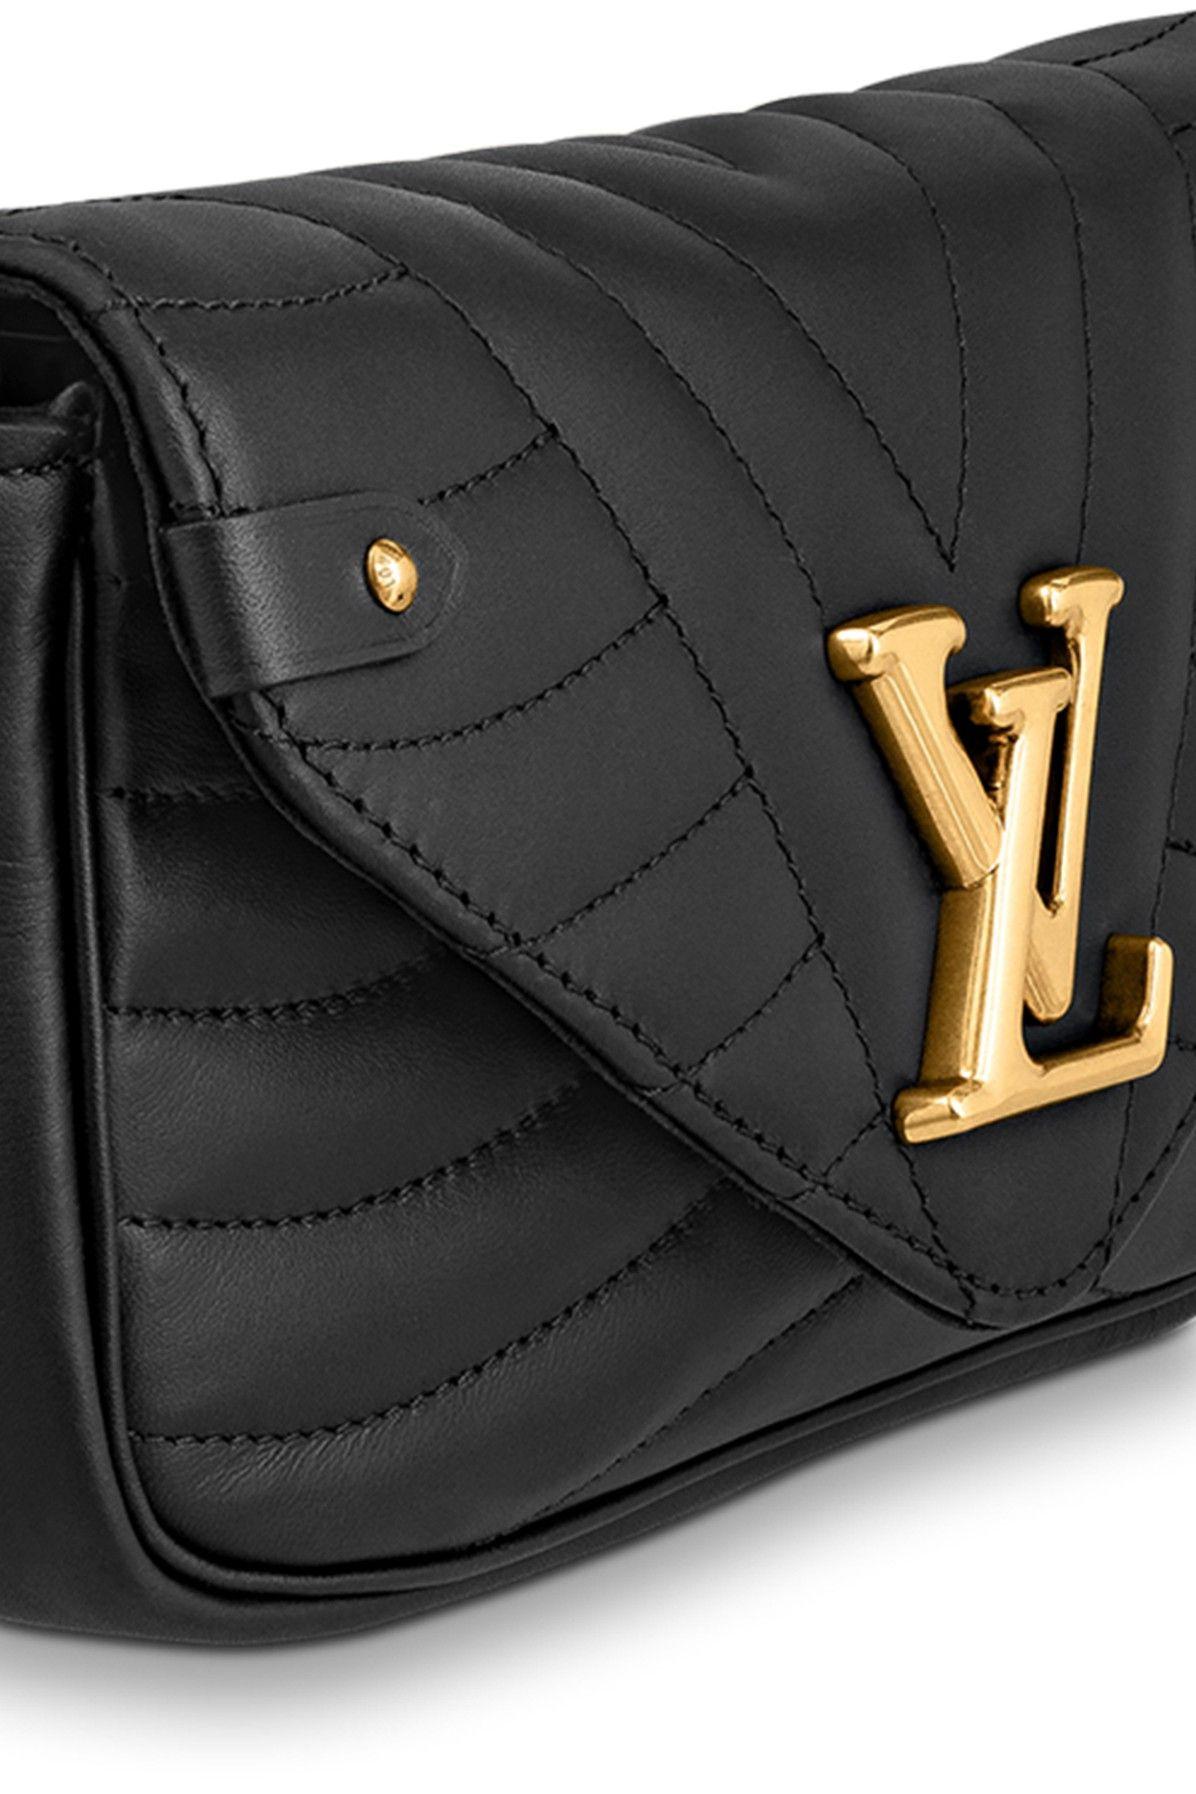 Louis Vuitton New Wave Chain Pochette Quilted Leather Black 1289091